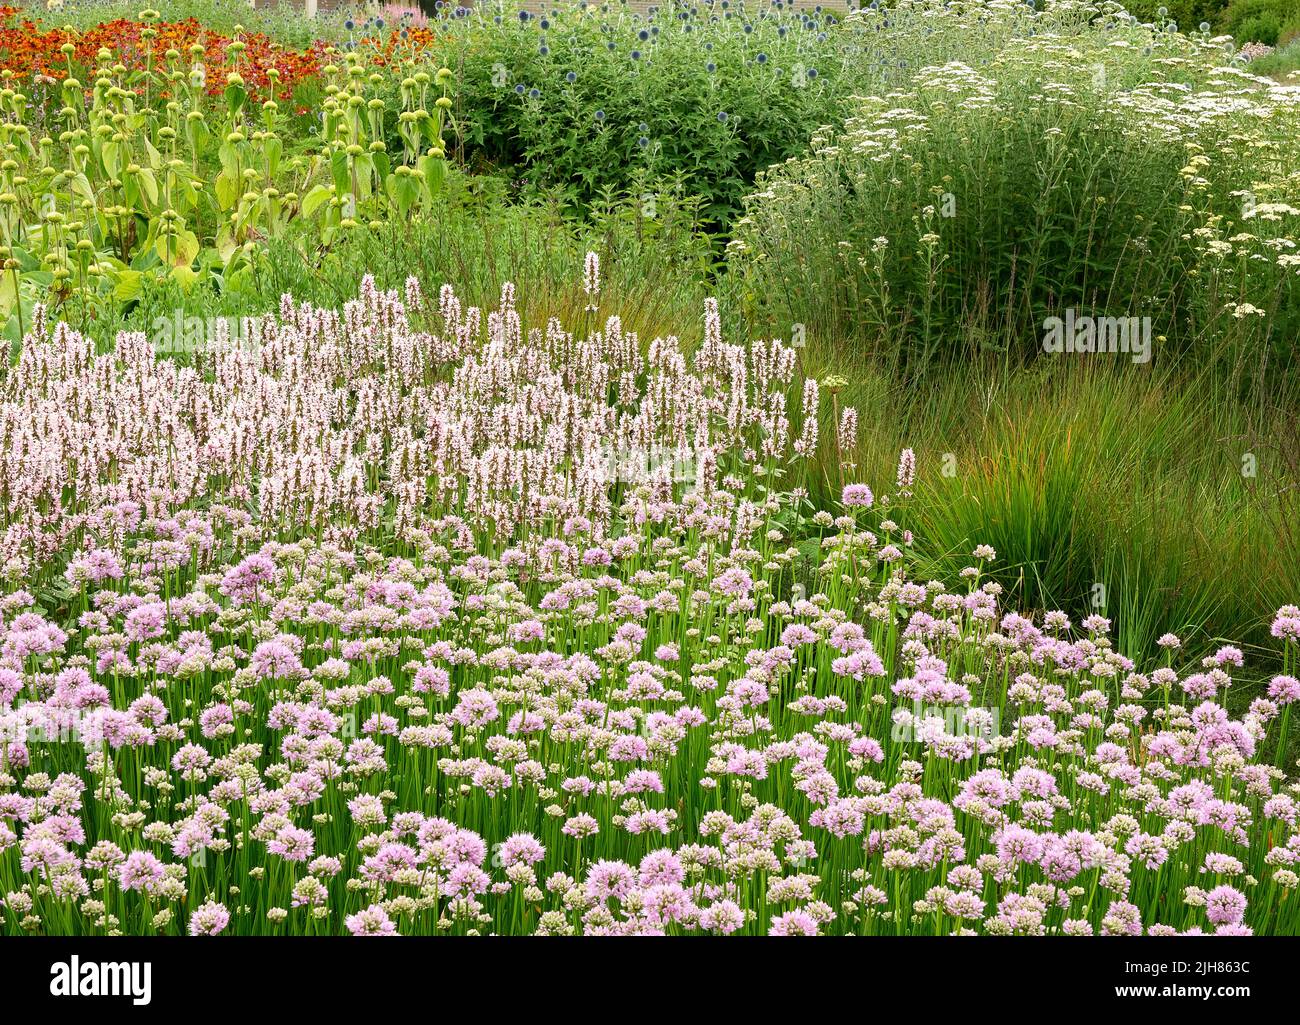 Soft summer planting featuring Scabious, Polygonium bistorta Superbum, Phlomis fruticosa and grasses at the Hauser and Wirth garden in Somerset UK Stock Photo